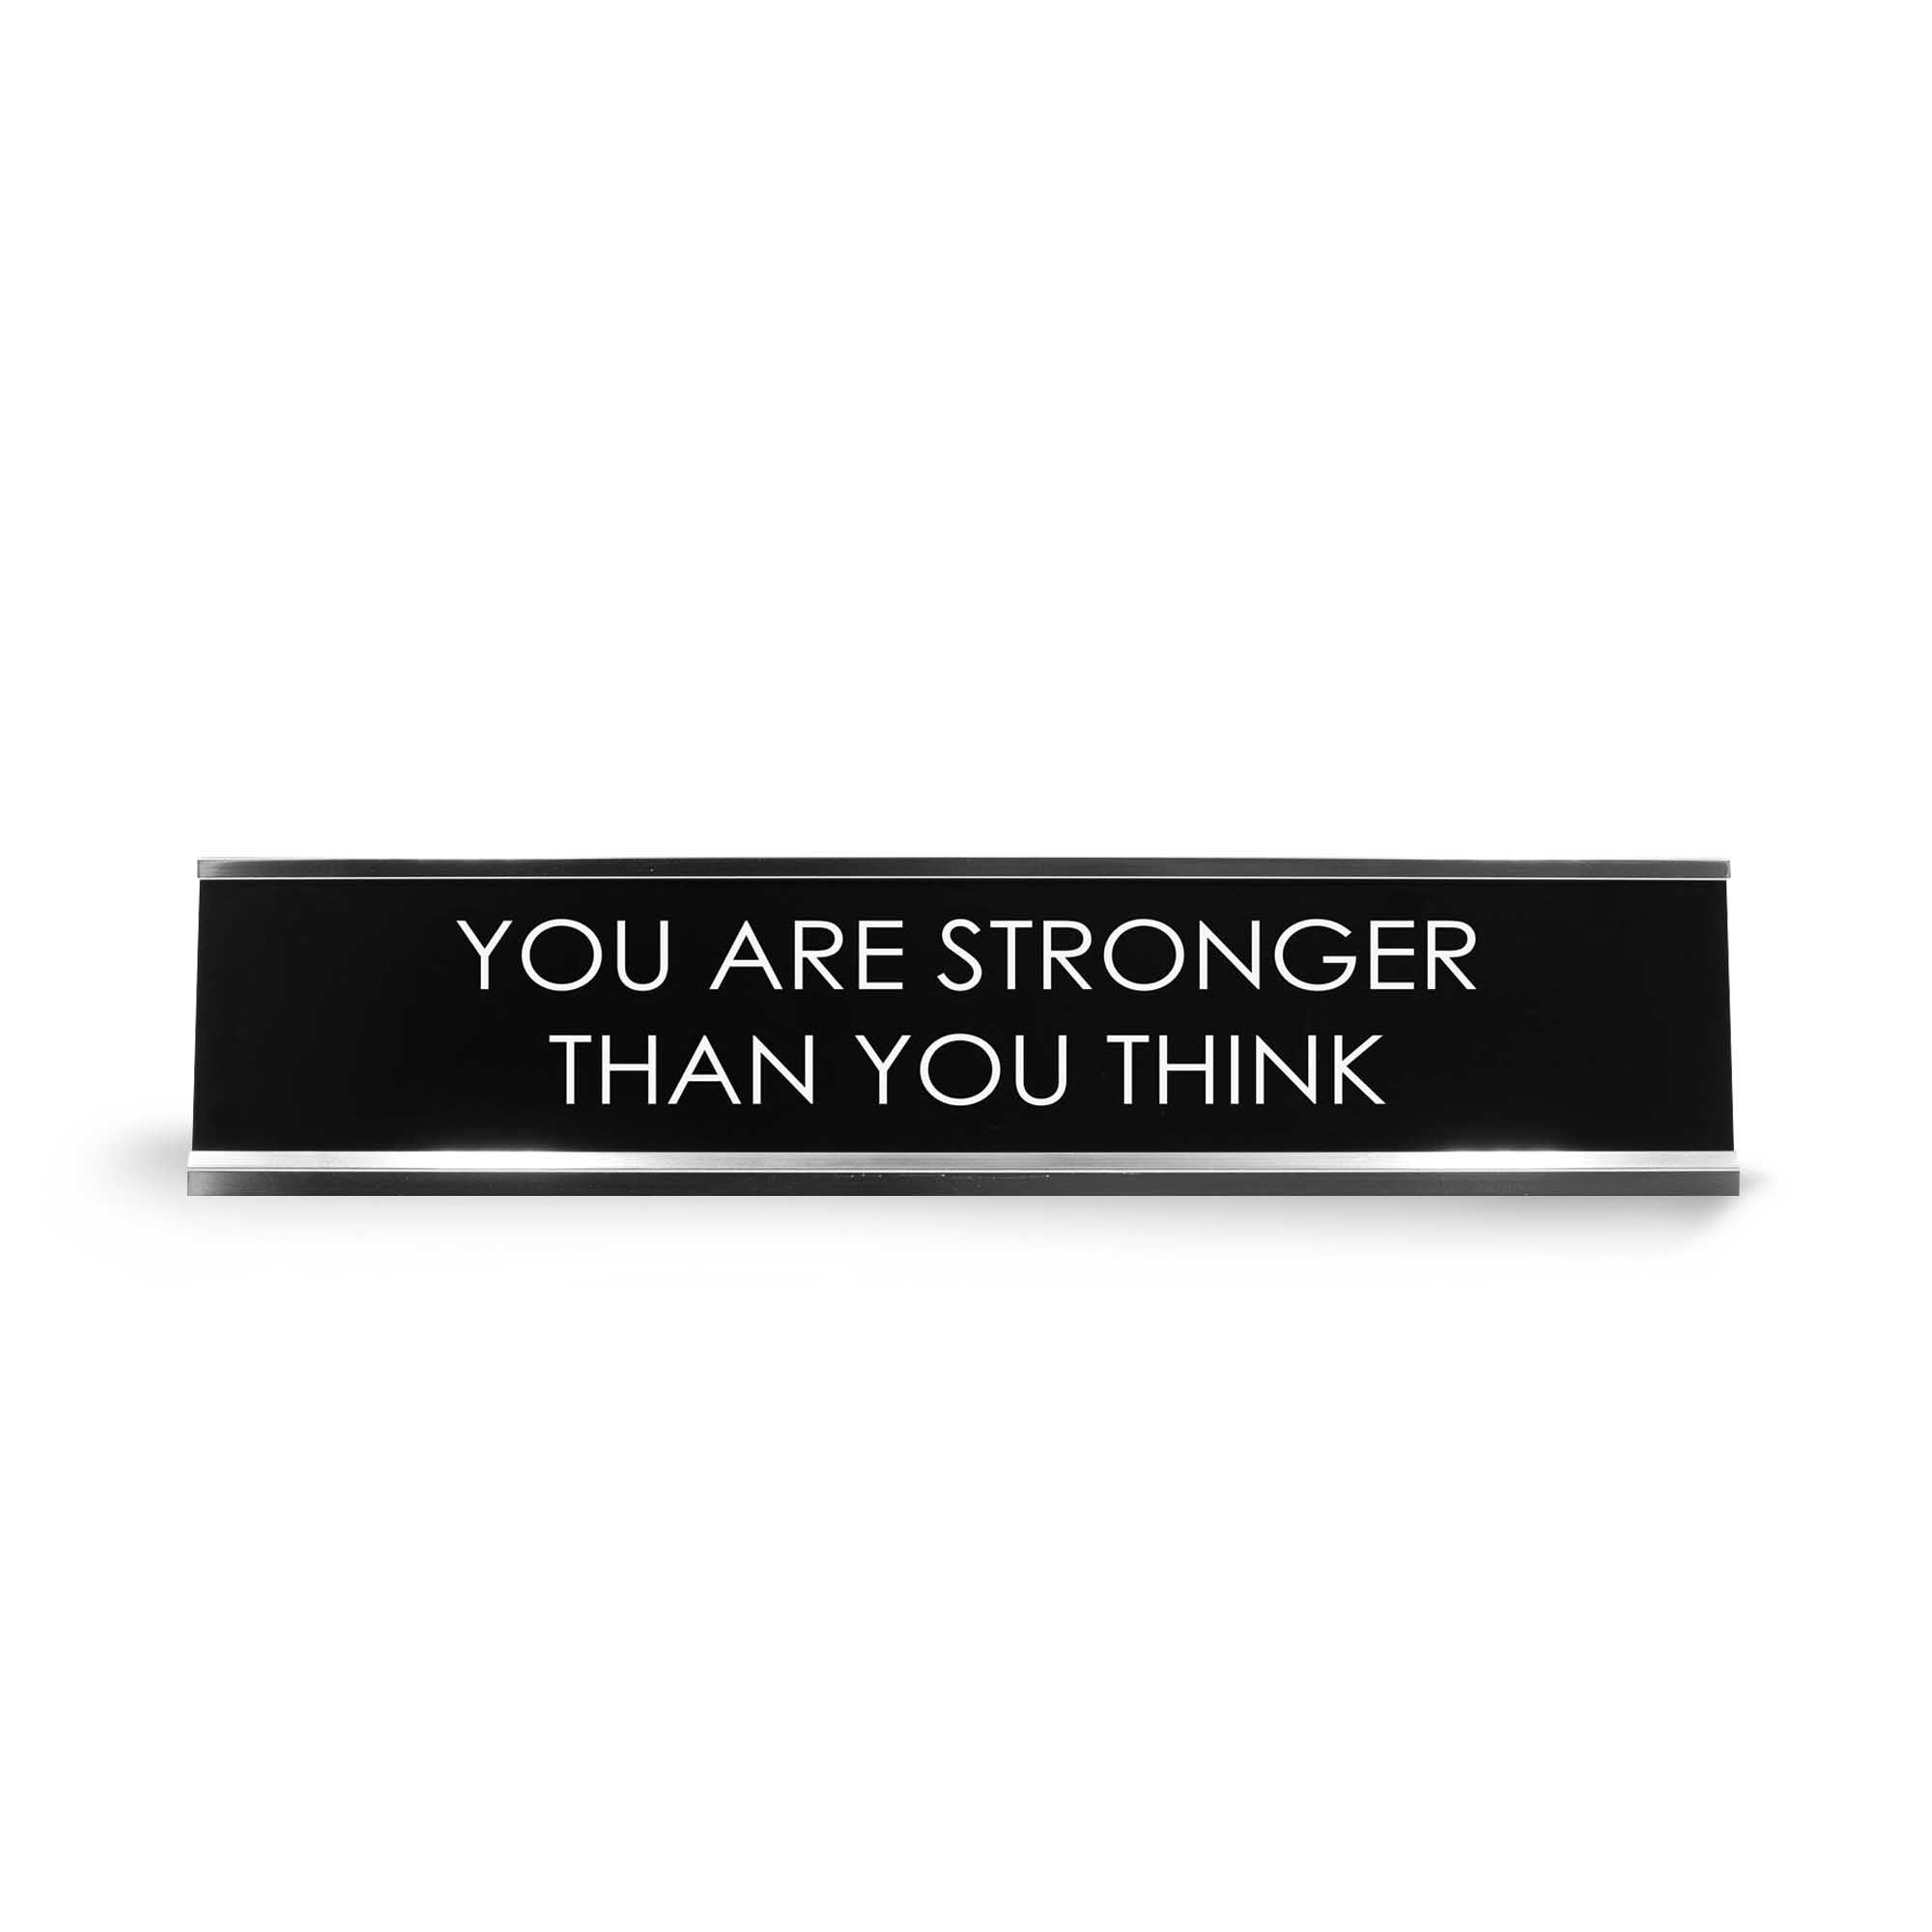 You Are Stronger Than You Think Novelty Desk Sign